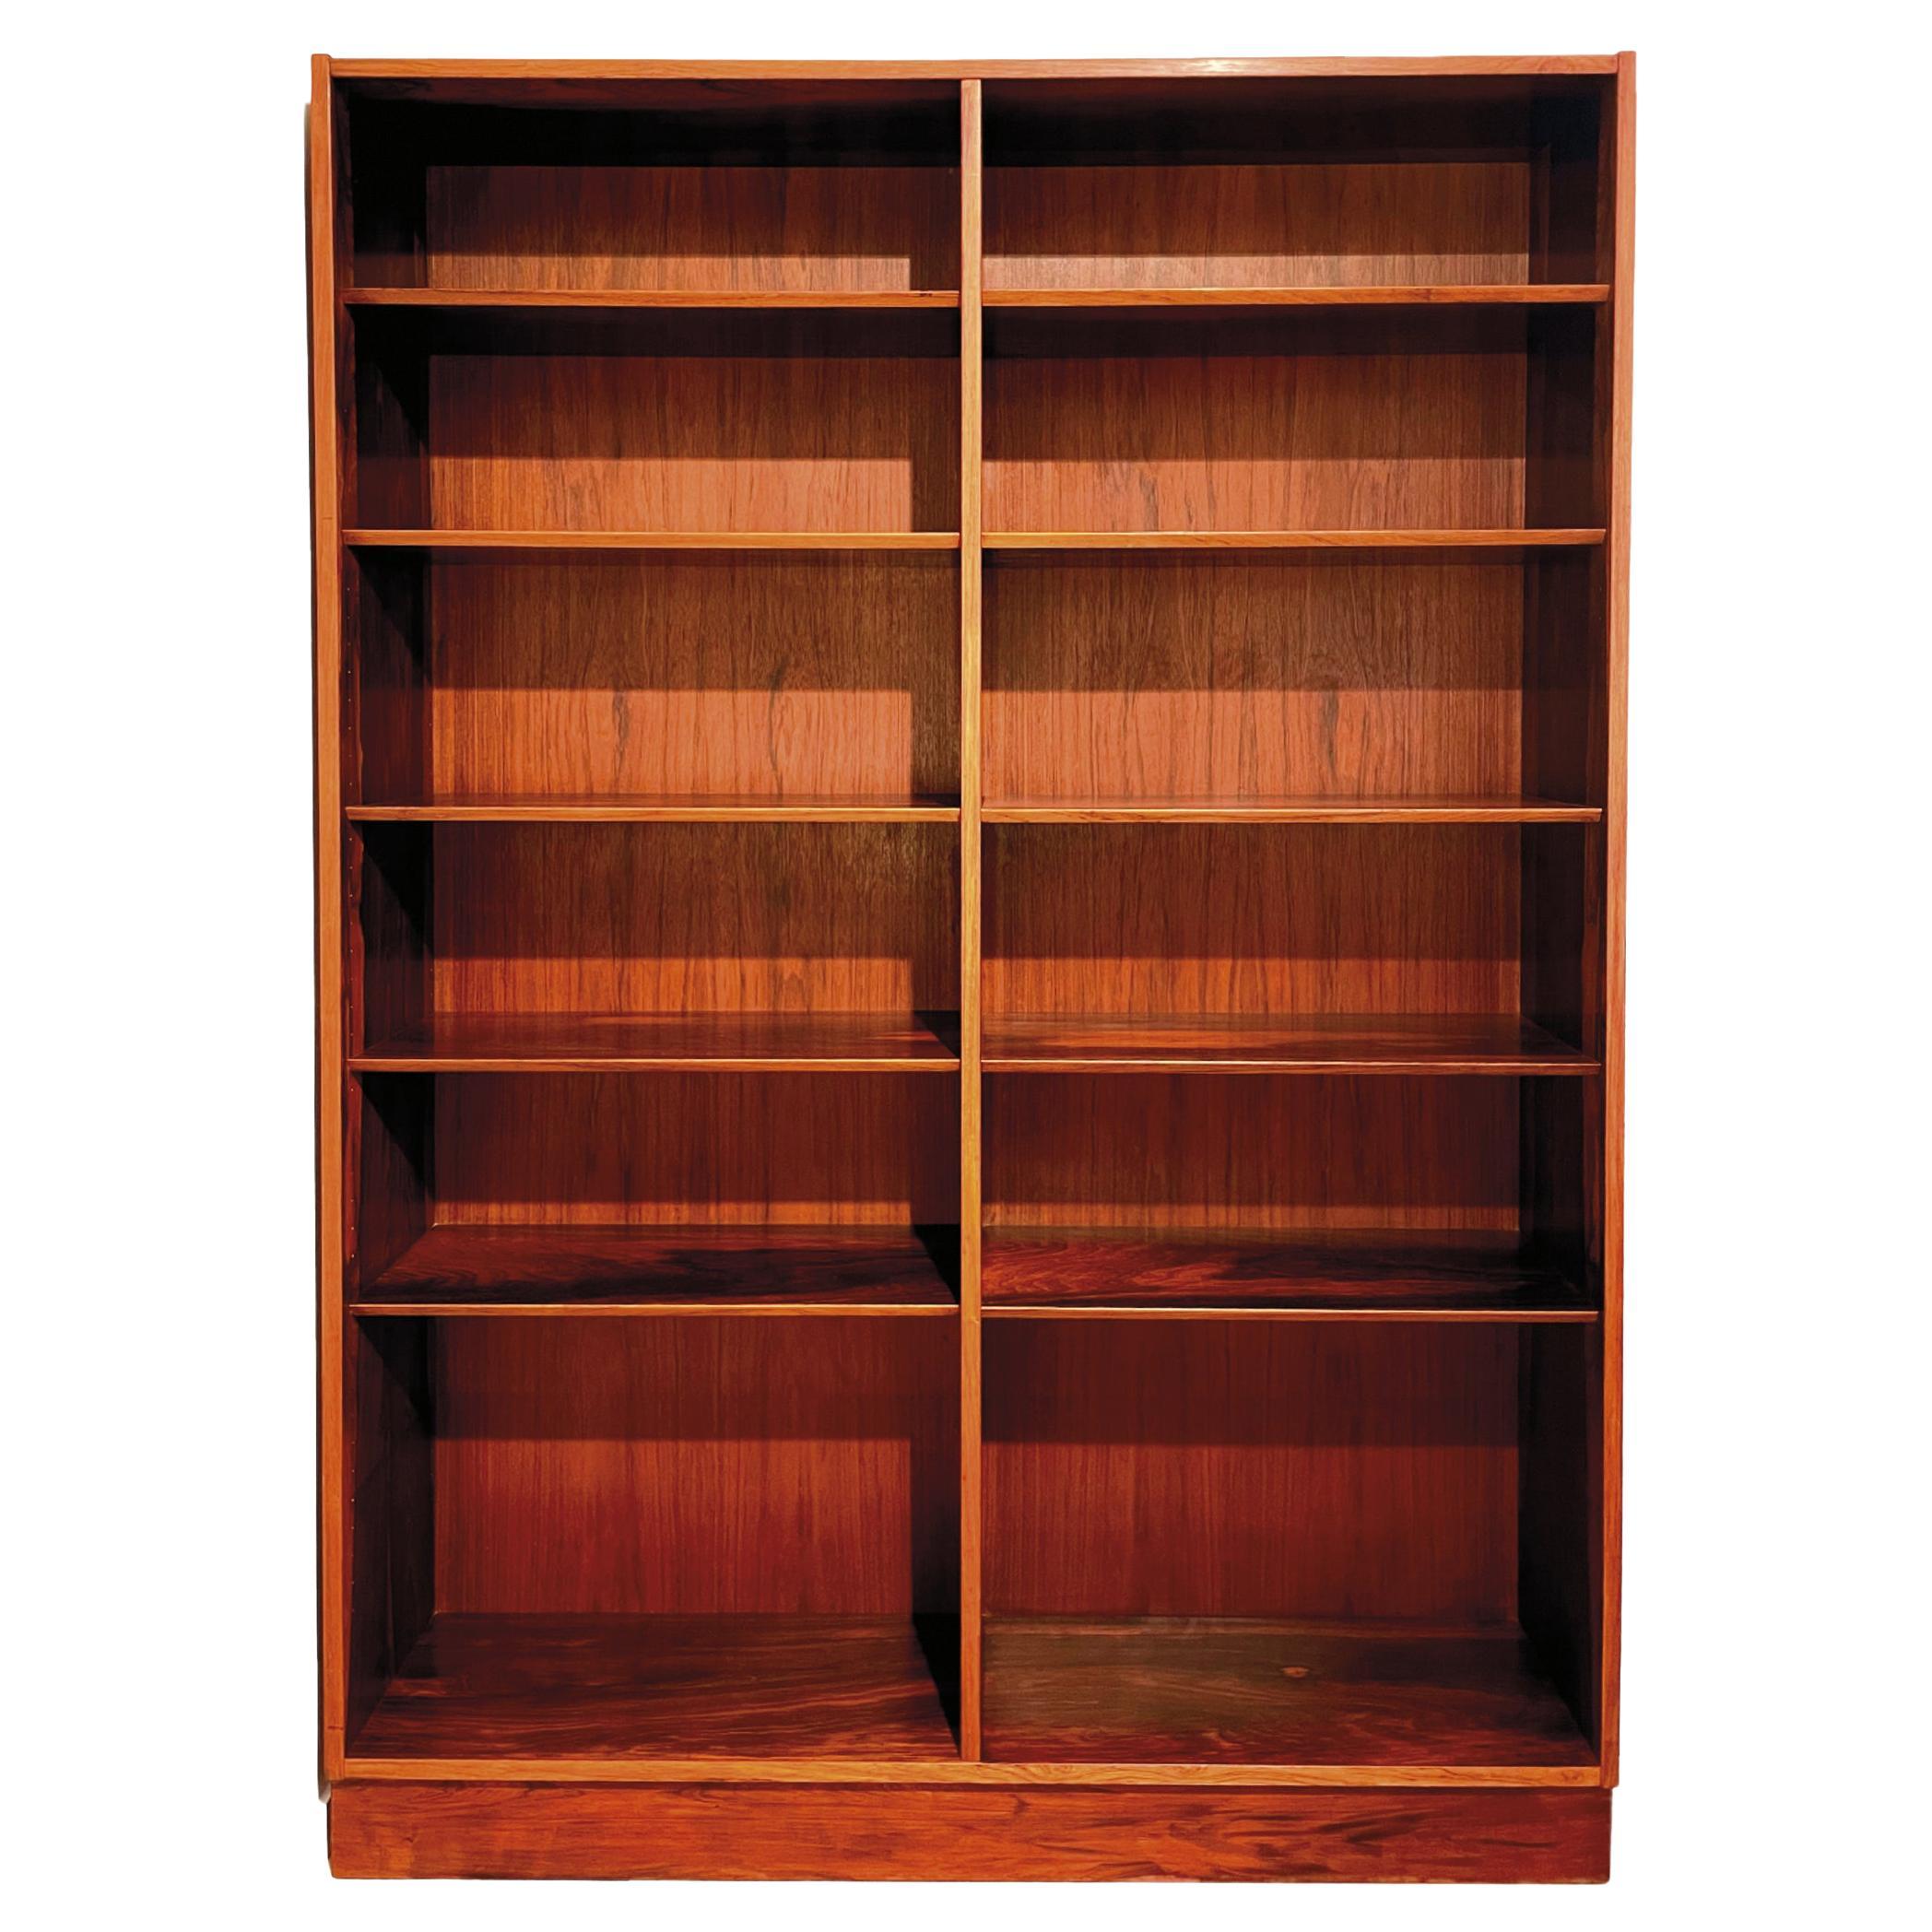 Rosewood bookcase by Poul Hundevad